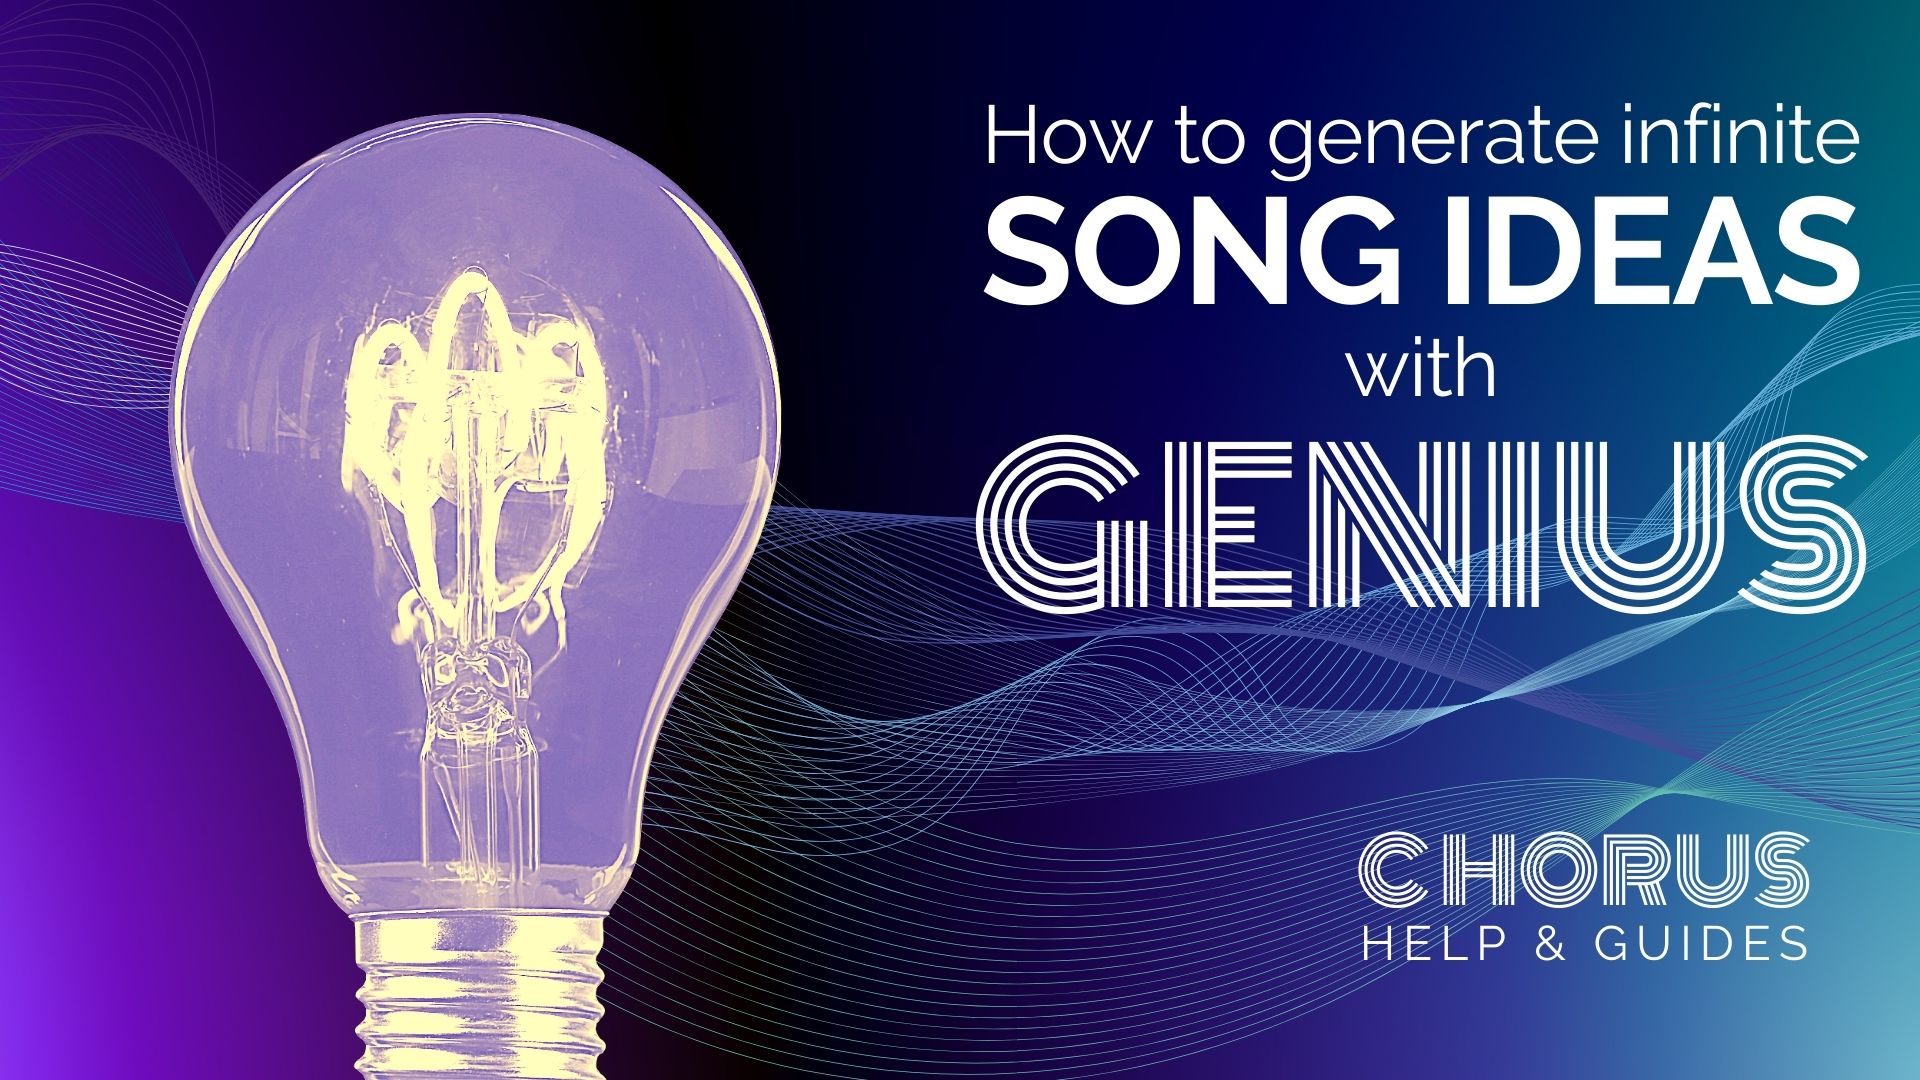 Generate infinite song ideas in seconds with Chorus